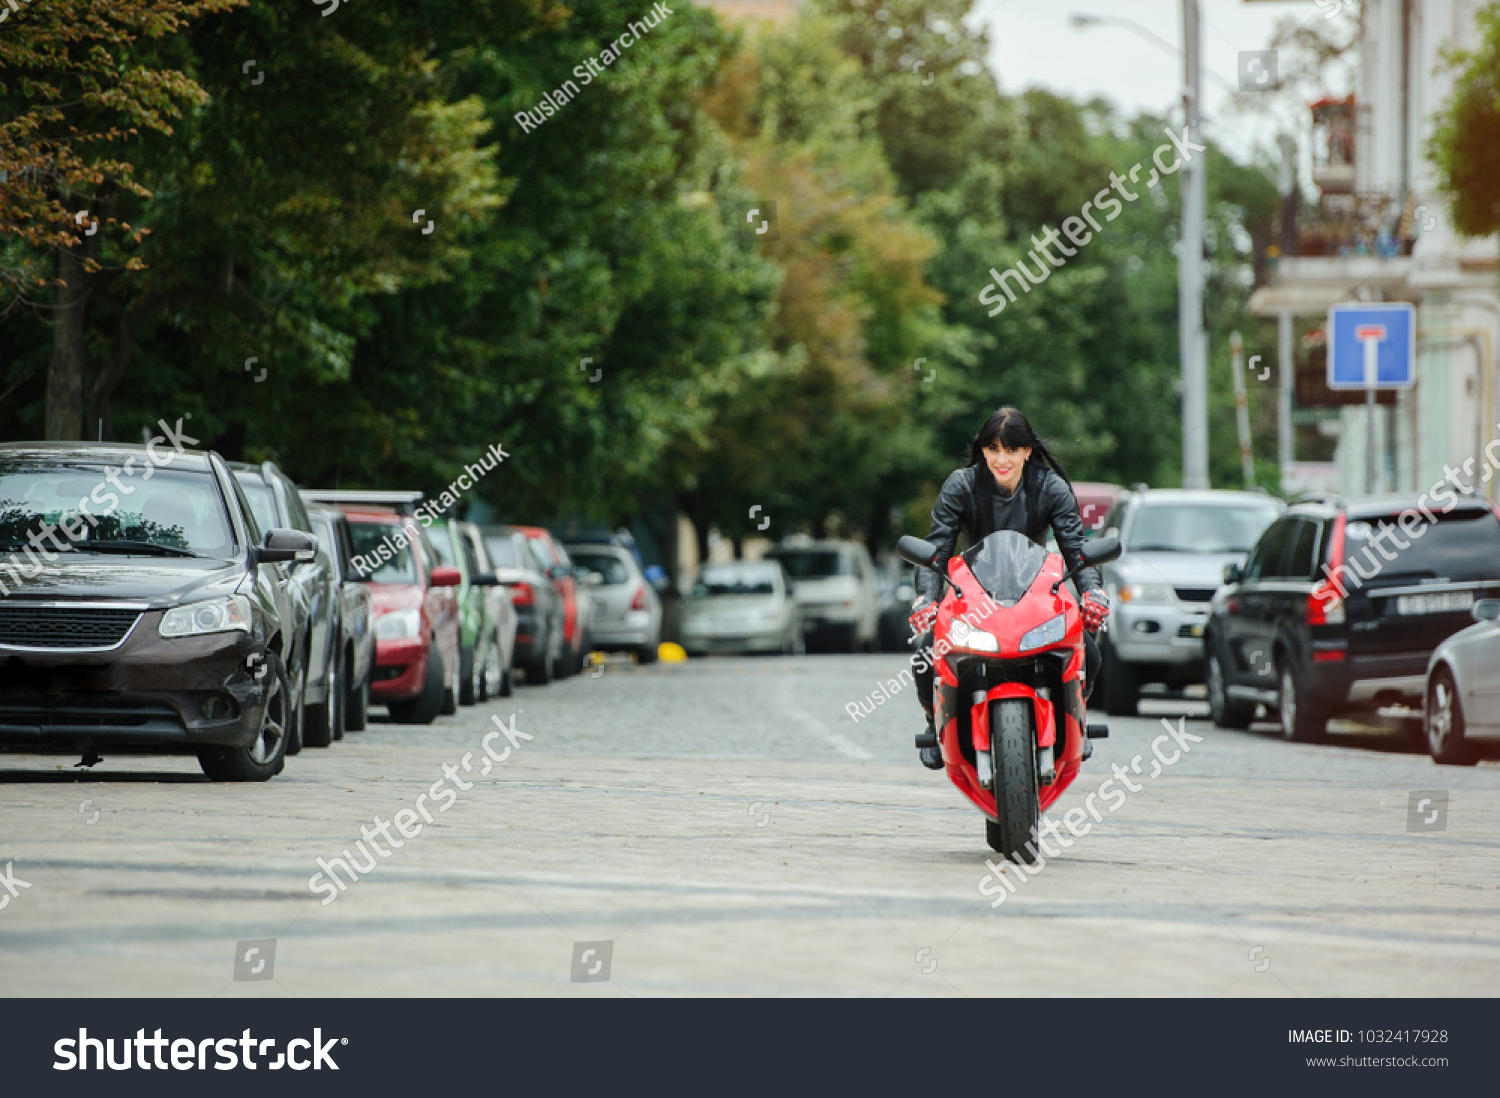 A biker girl in a leather jacket on a motorcycle rides in the city. #1032417928